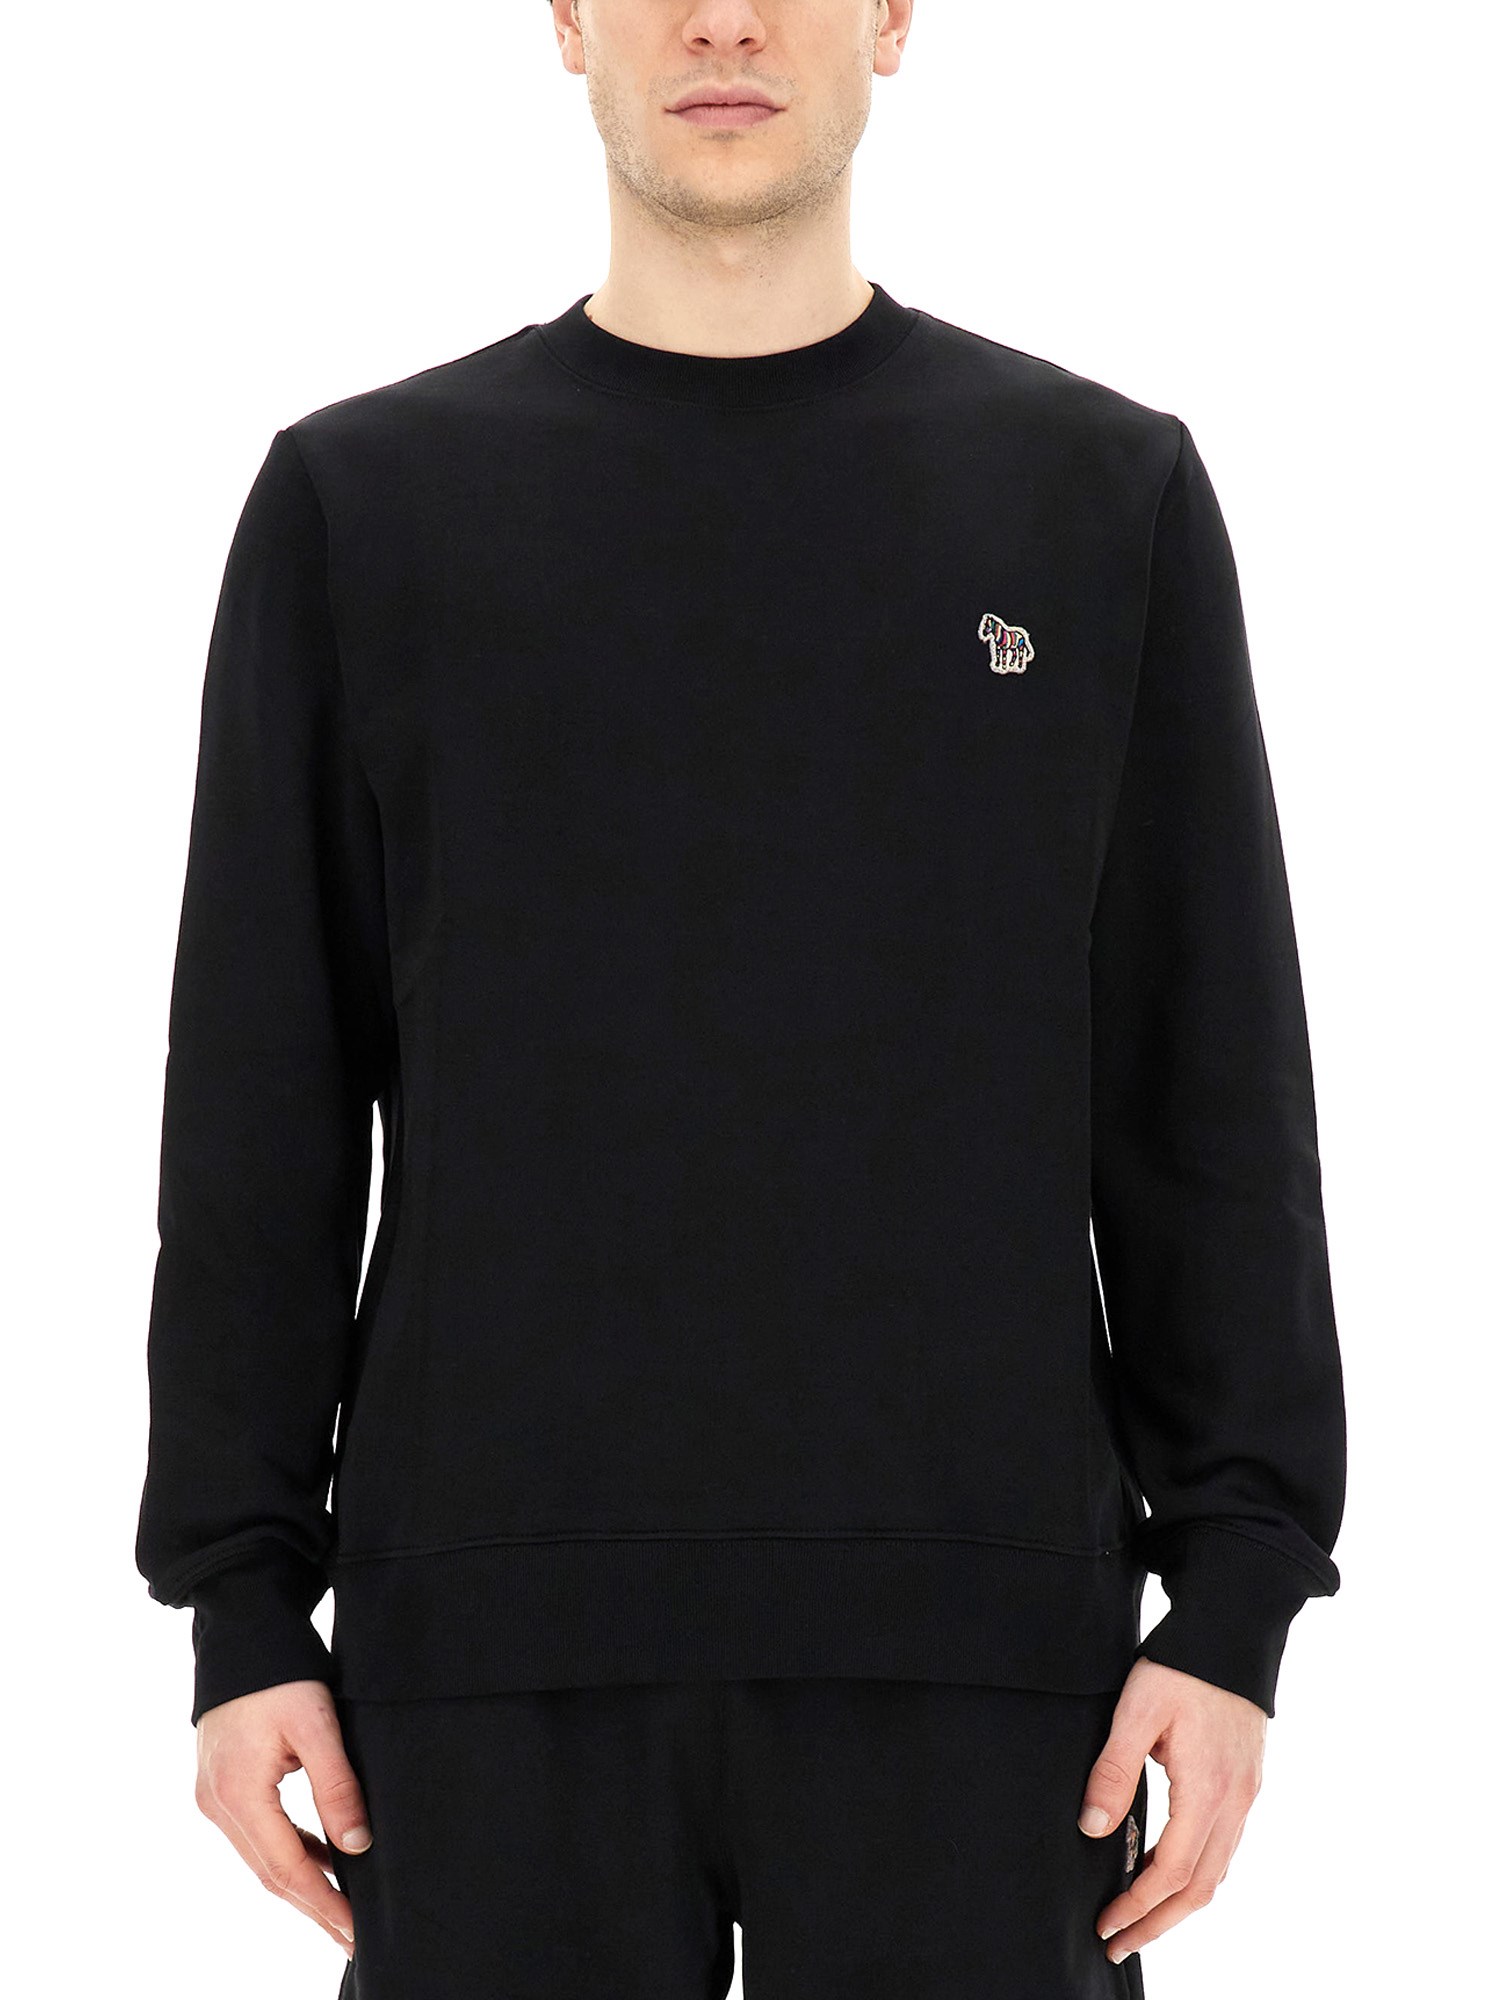 ps by paul smith sweatshirt with zebra embroidery